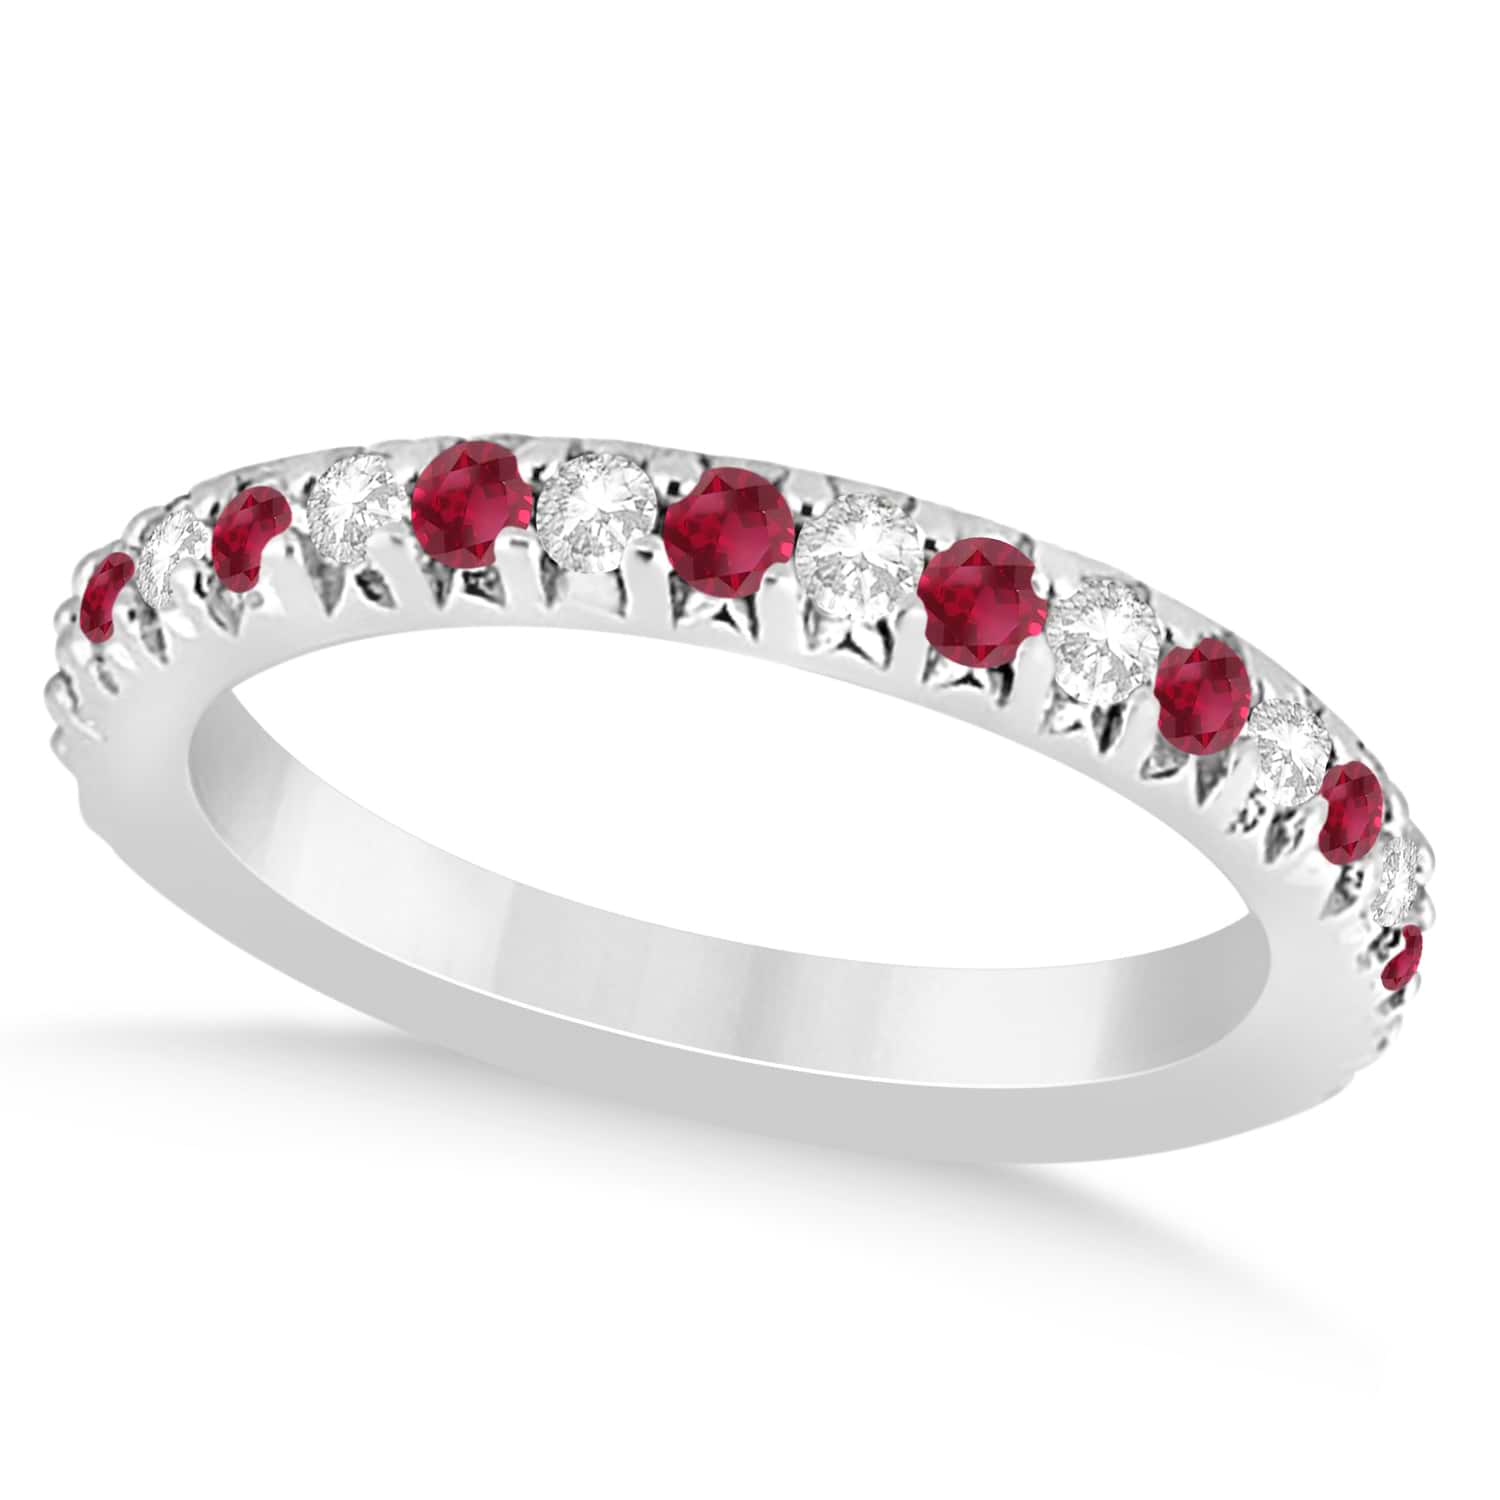 Ruby & Diamond Accented Wedding Band 18k White Gold 0.60ct